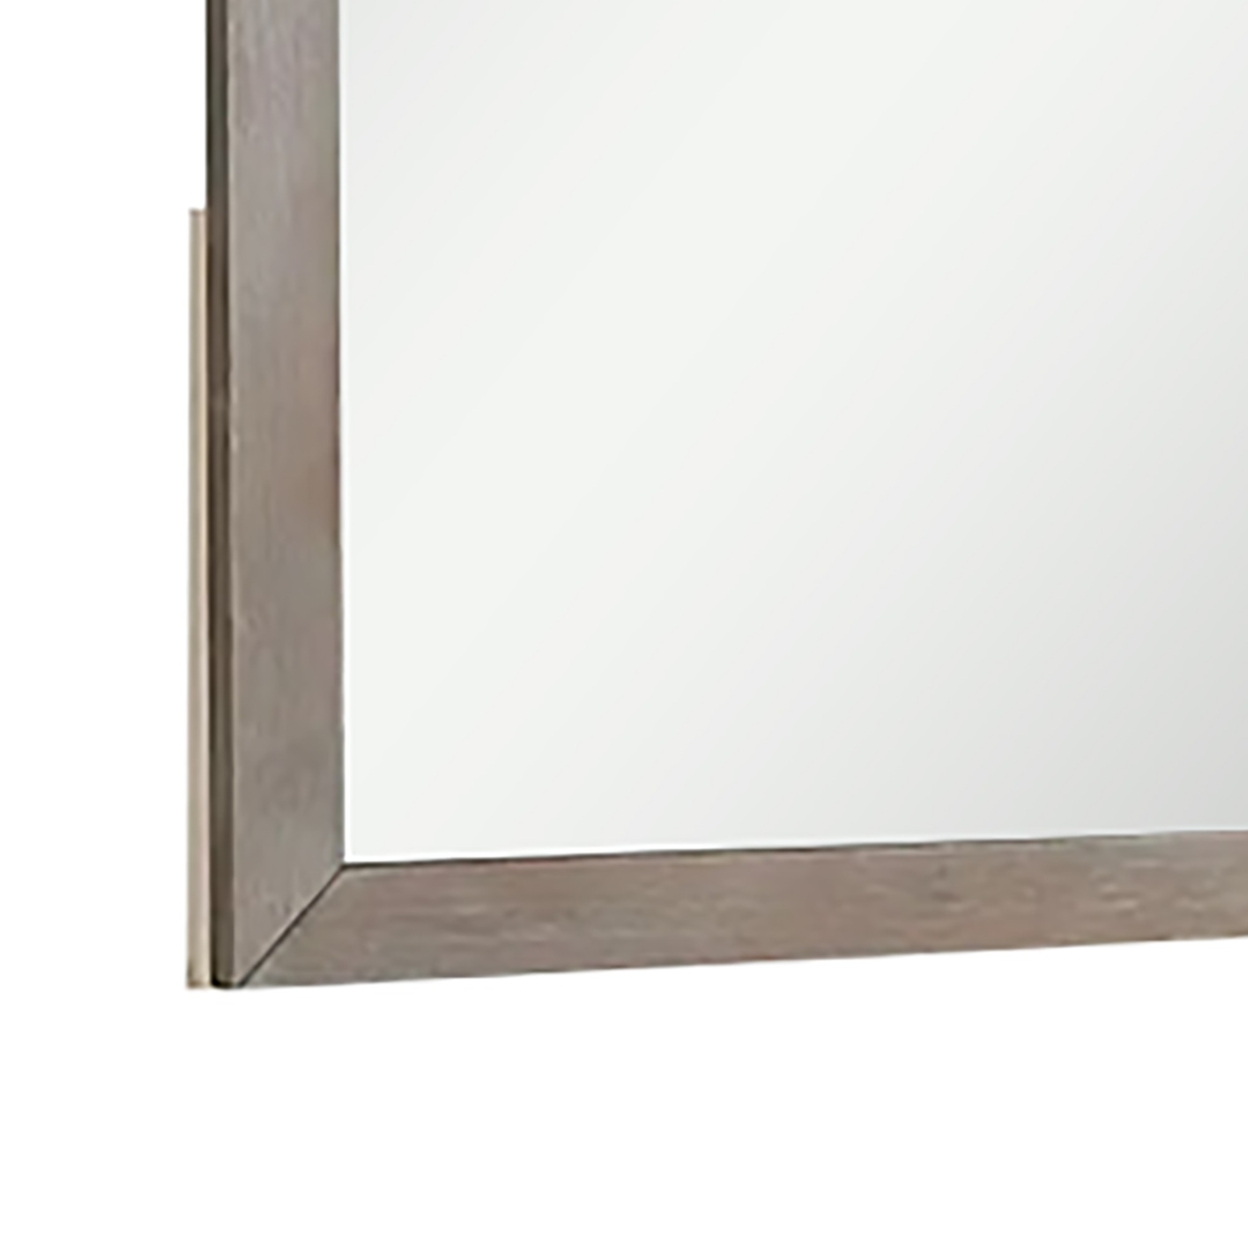 Wall Mirror With Wooden Frame And Grain Details, Natural Brown- Saltoro Sherpi